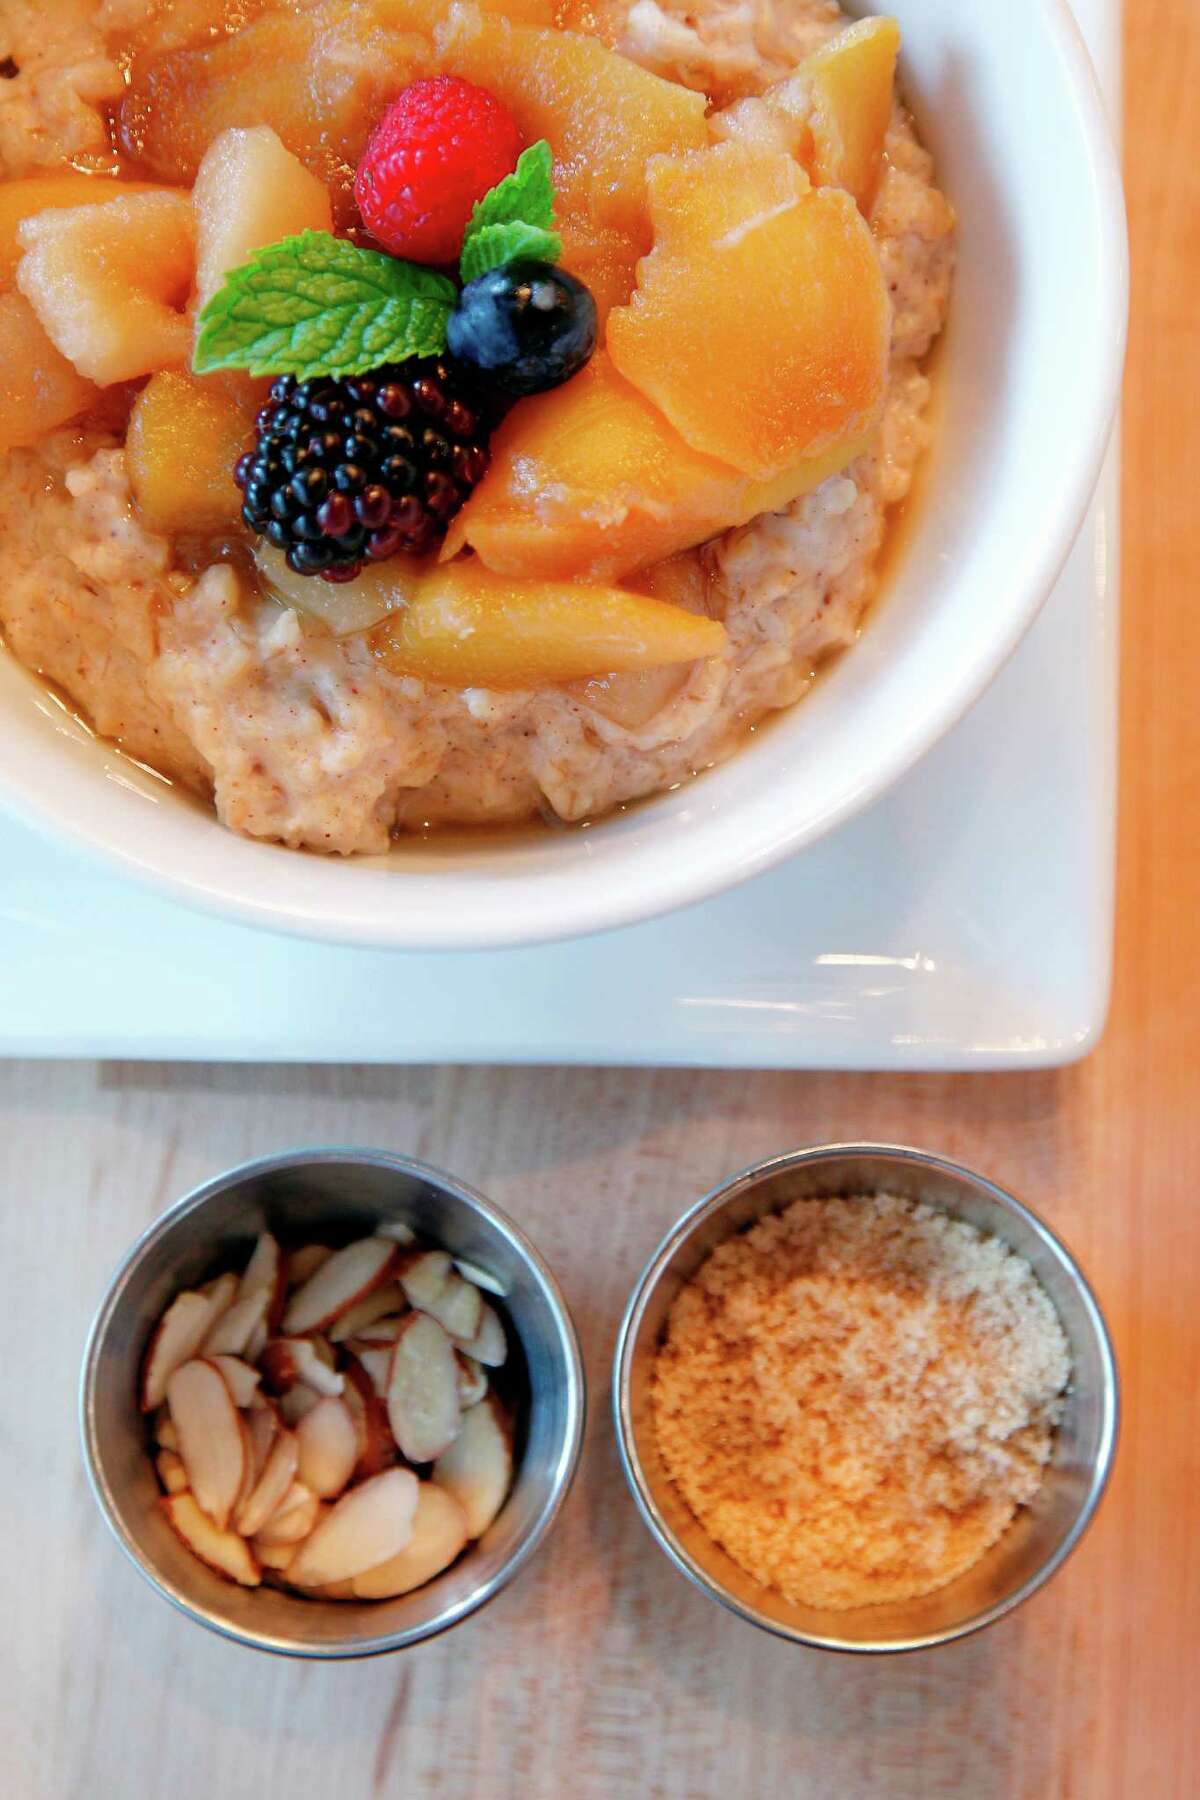 Steel-Cut Oats with Seasonal Fruit Compote comes with almonds and milk. on Thursday, Sept. 13, 2012, in Houston. Adair Kitchen serves American cuisine. ( Mayra Beltran / Houston Chronicle ) ( Mayra Beltran / Houston Chronicle )